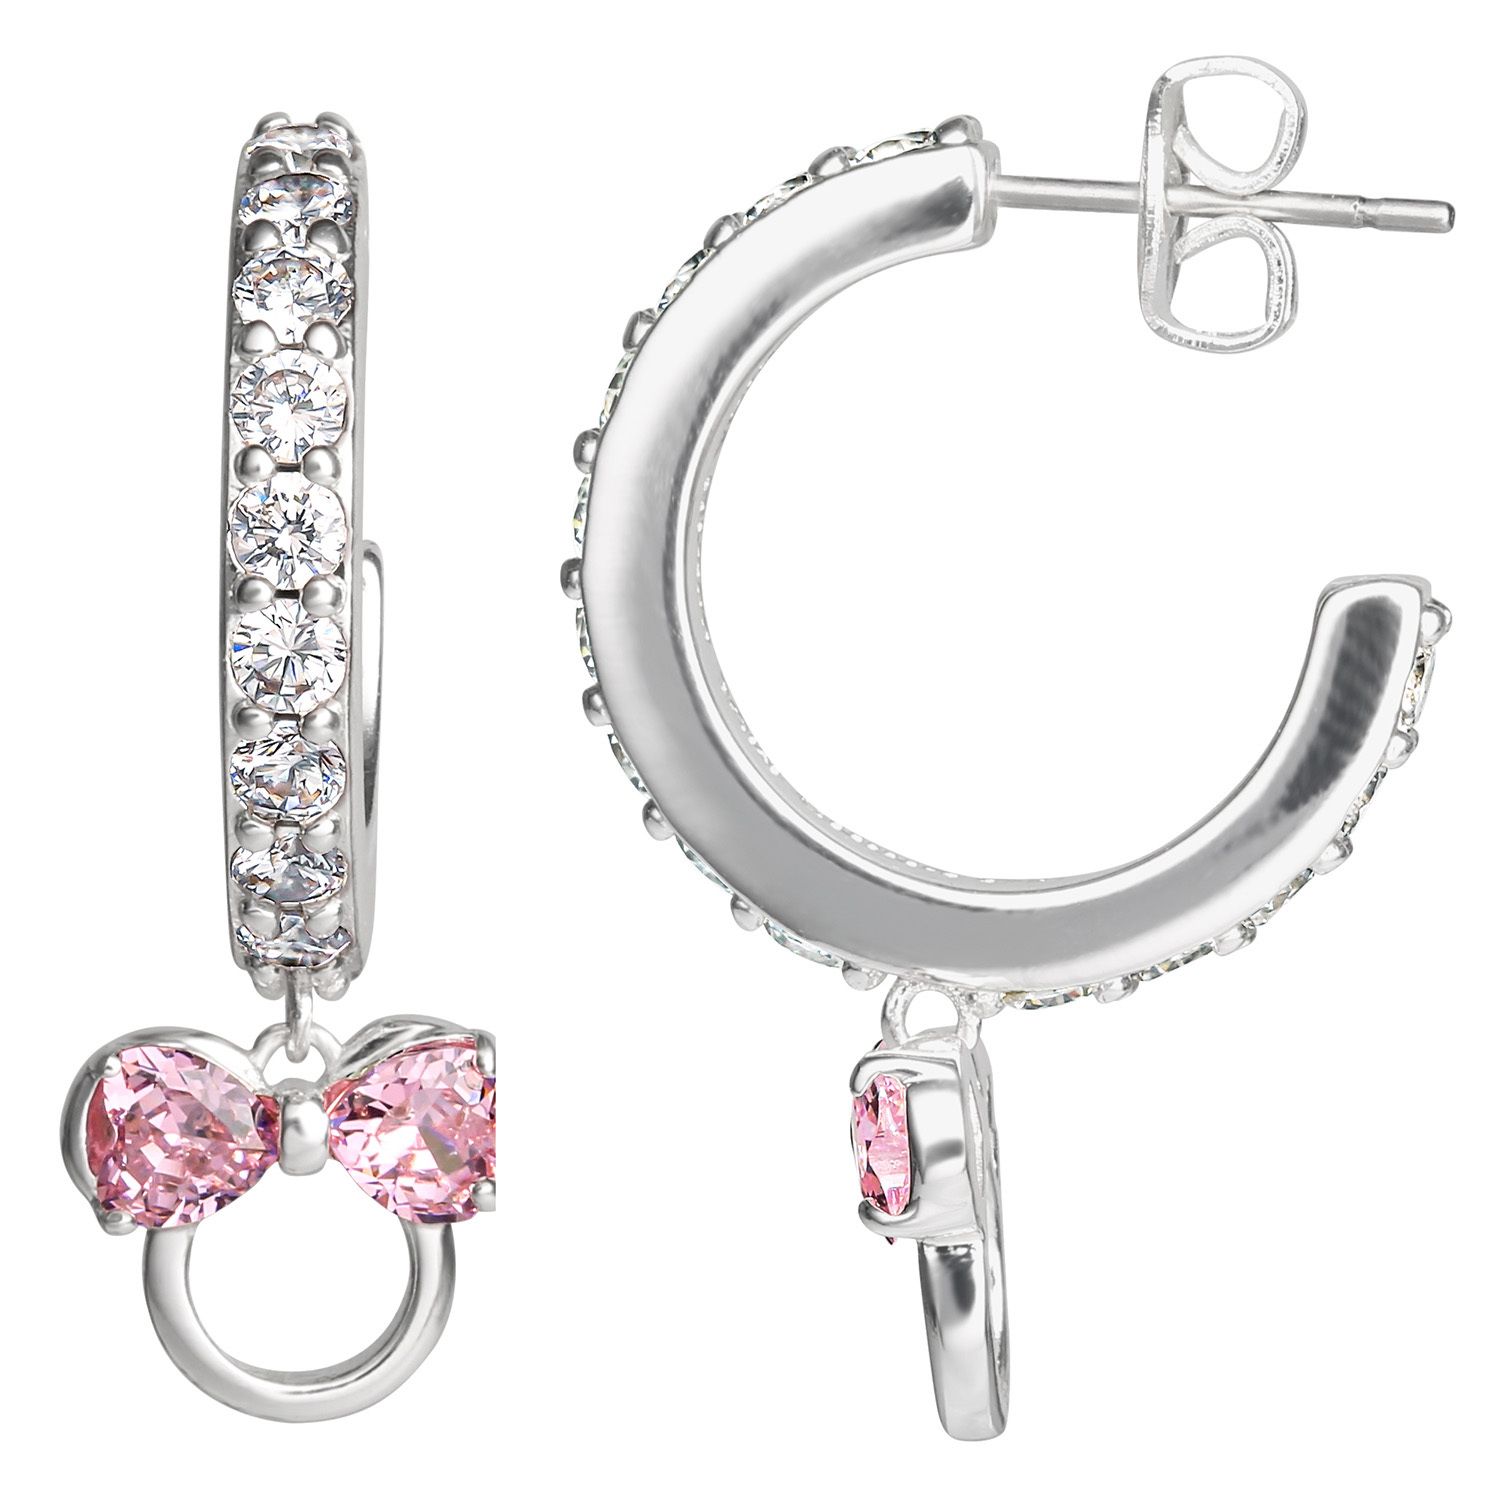 Image for Disney s Minnie Mouse Pink & Clear Cubic Zirconia C-Hoop Drop Earrings at Kohl's.